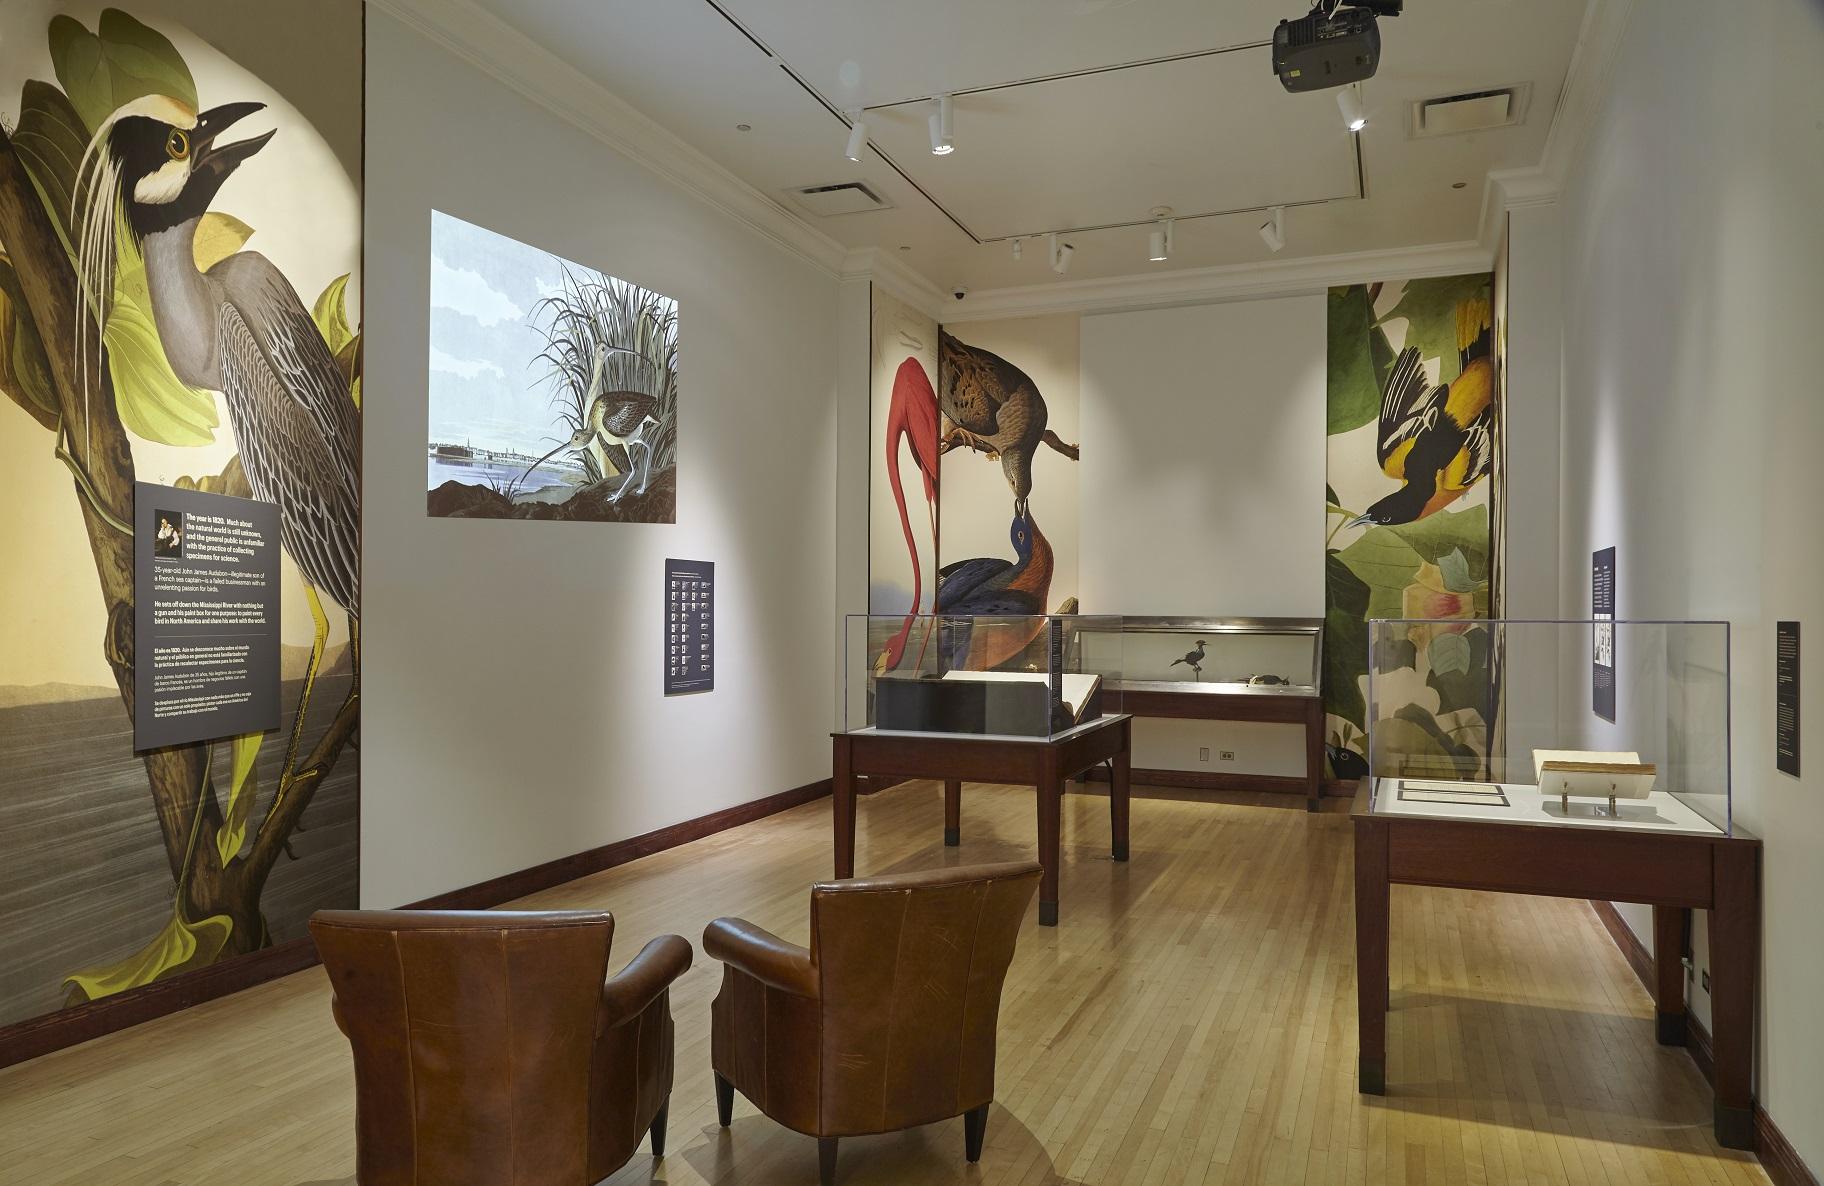 Housed in Brooker Gallery, the Field Museum’s new exhibit “Audubon's Birds of America” features floor-to-ceiling replicas of Audubon’s most famous illustrations. (Michelle Kuo / Field Museum)